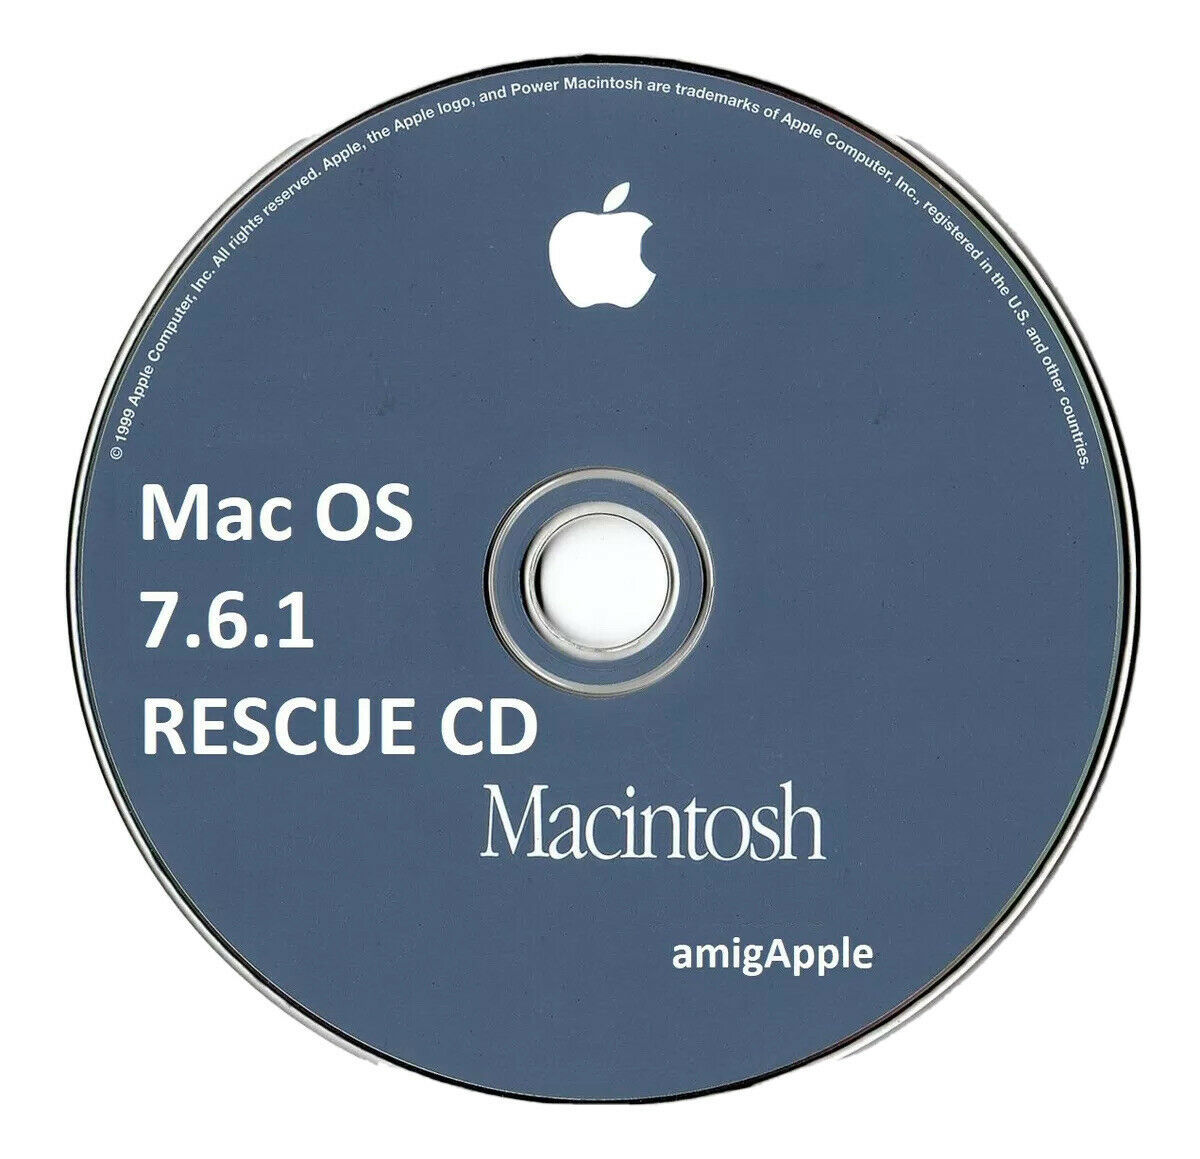 Macintosh software 7.6.1 rescue cd hd tools expanders stuffit expander